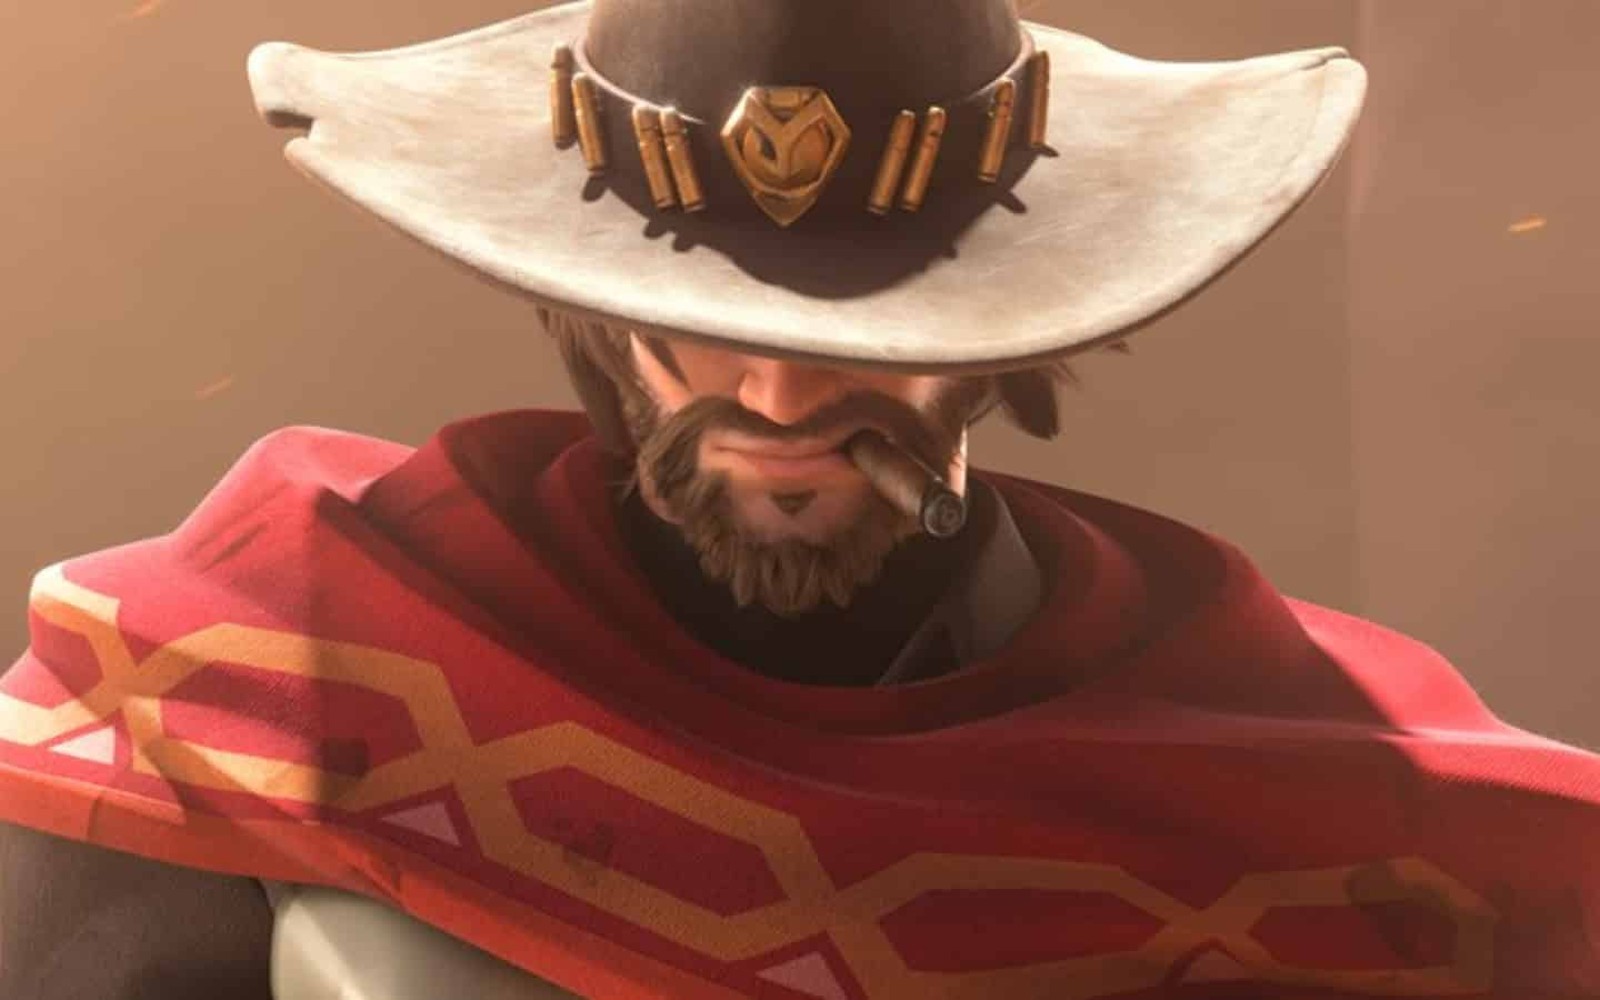 ‘Overwatch’ hero McCree shall be renamed Cole Cassidy on October 26th